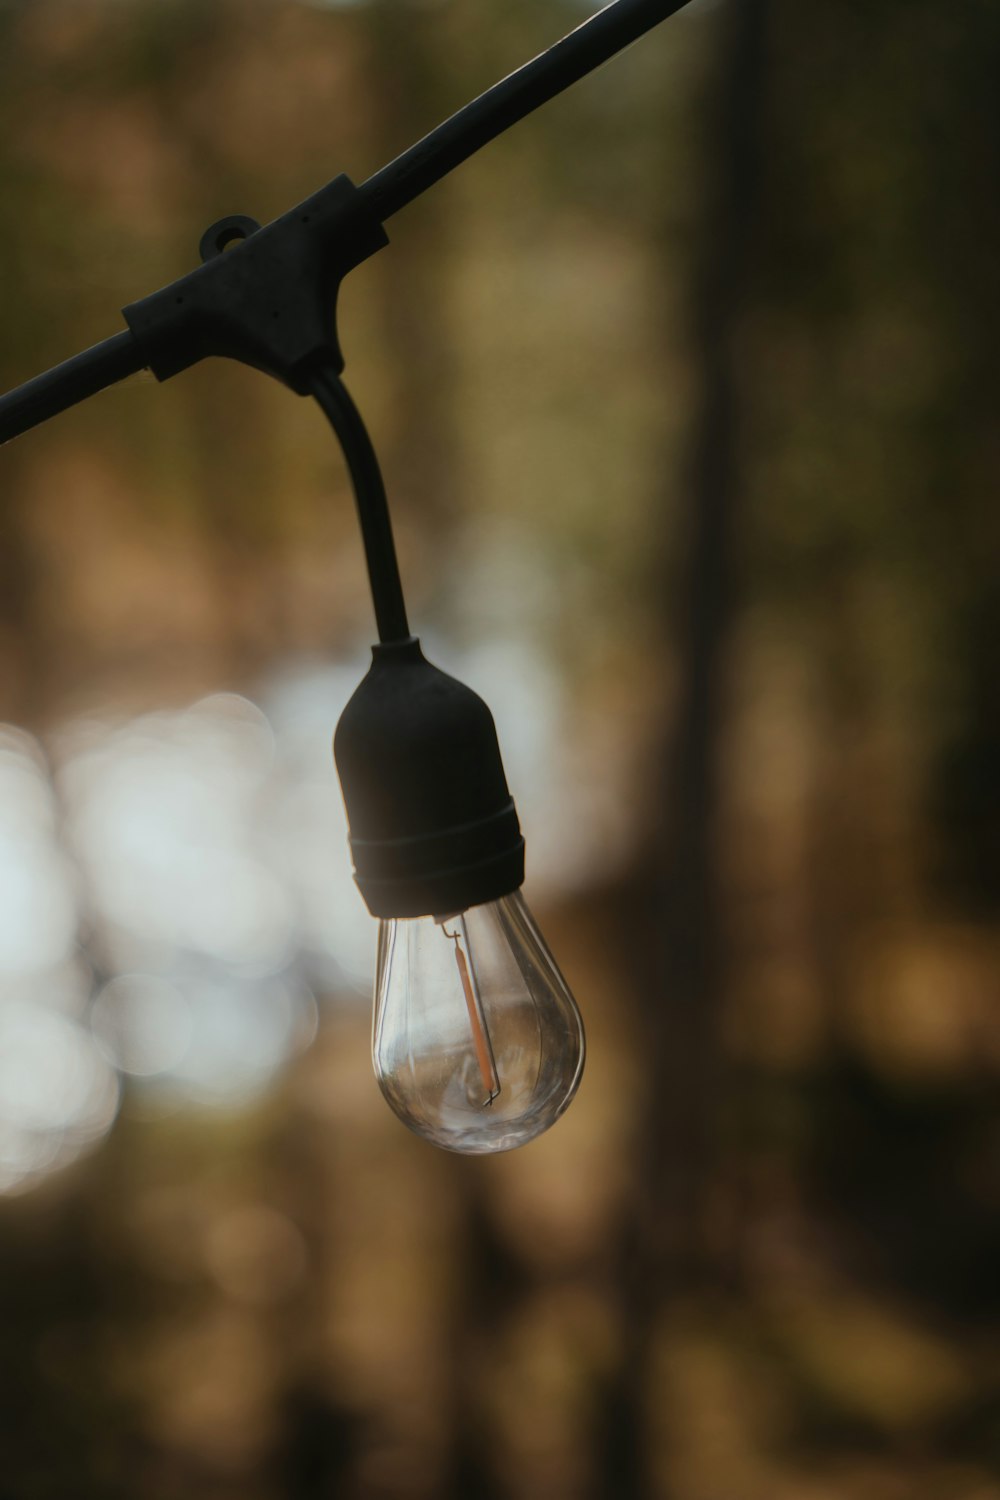 a close up of a light bulb hanging from a wire